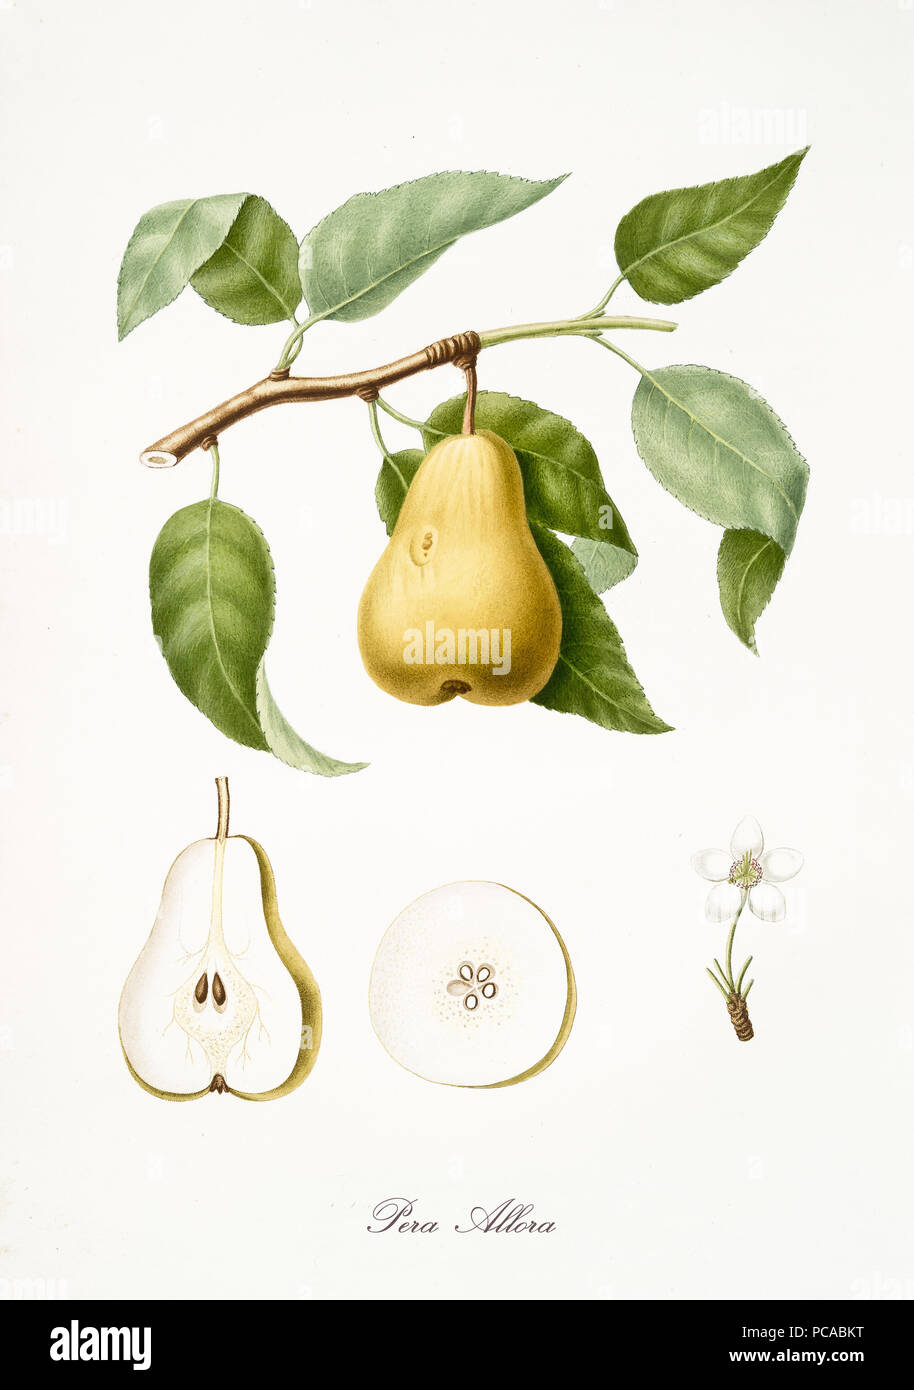 Pear, also known as Allora pear, pear tree leaves, fruit section and flower isolated on white background. Old botanical detailed illustration by Giorgio Gallesio publ. 1817, 1839 Pisa Italy Stock Photo